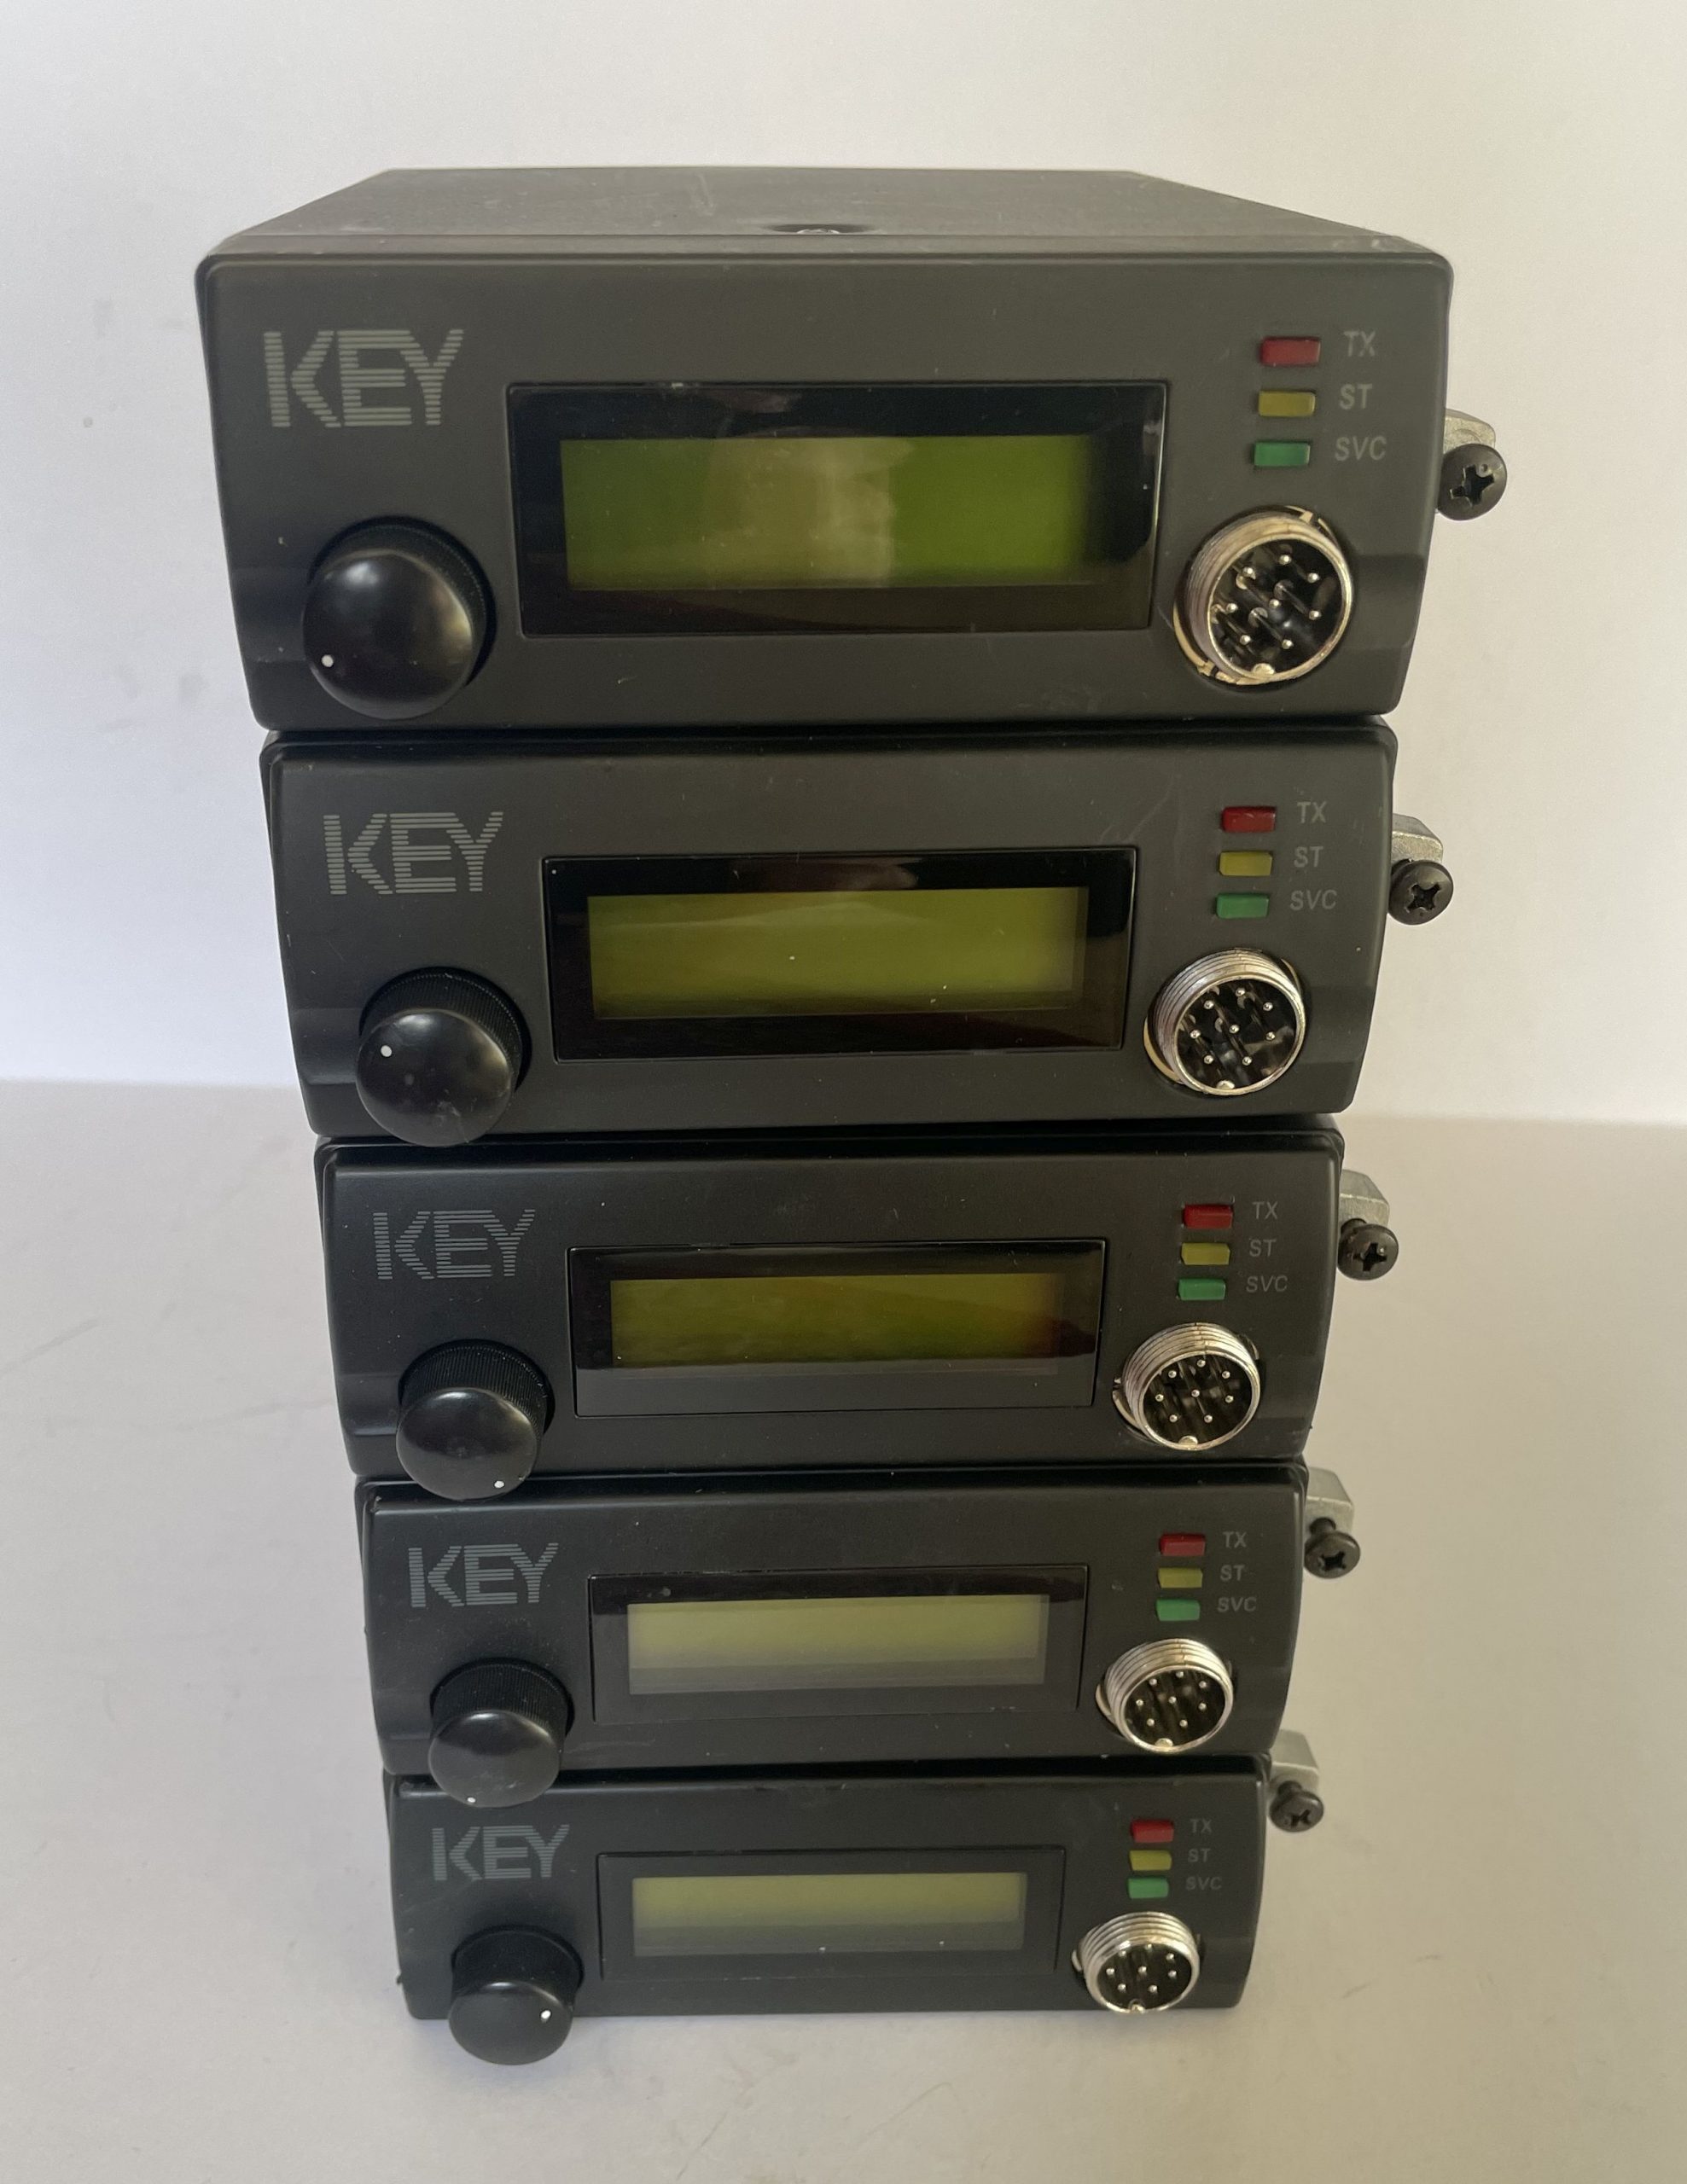 Now selling KM4000 radios – KM3000s all sold!